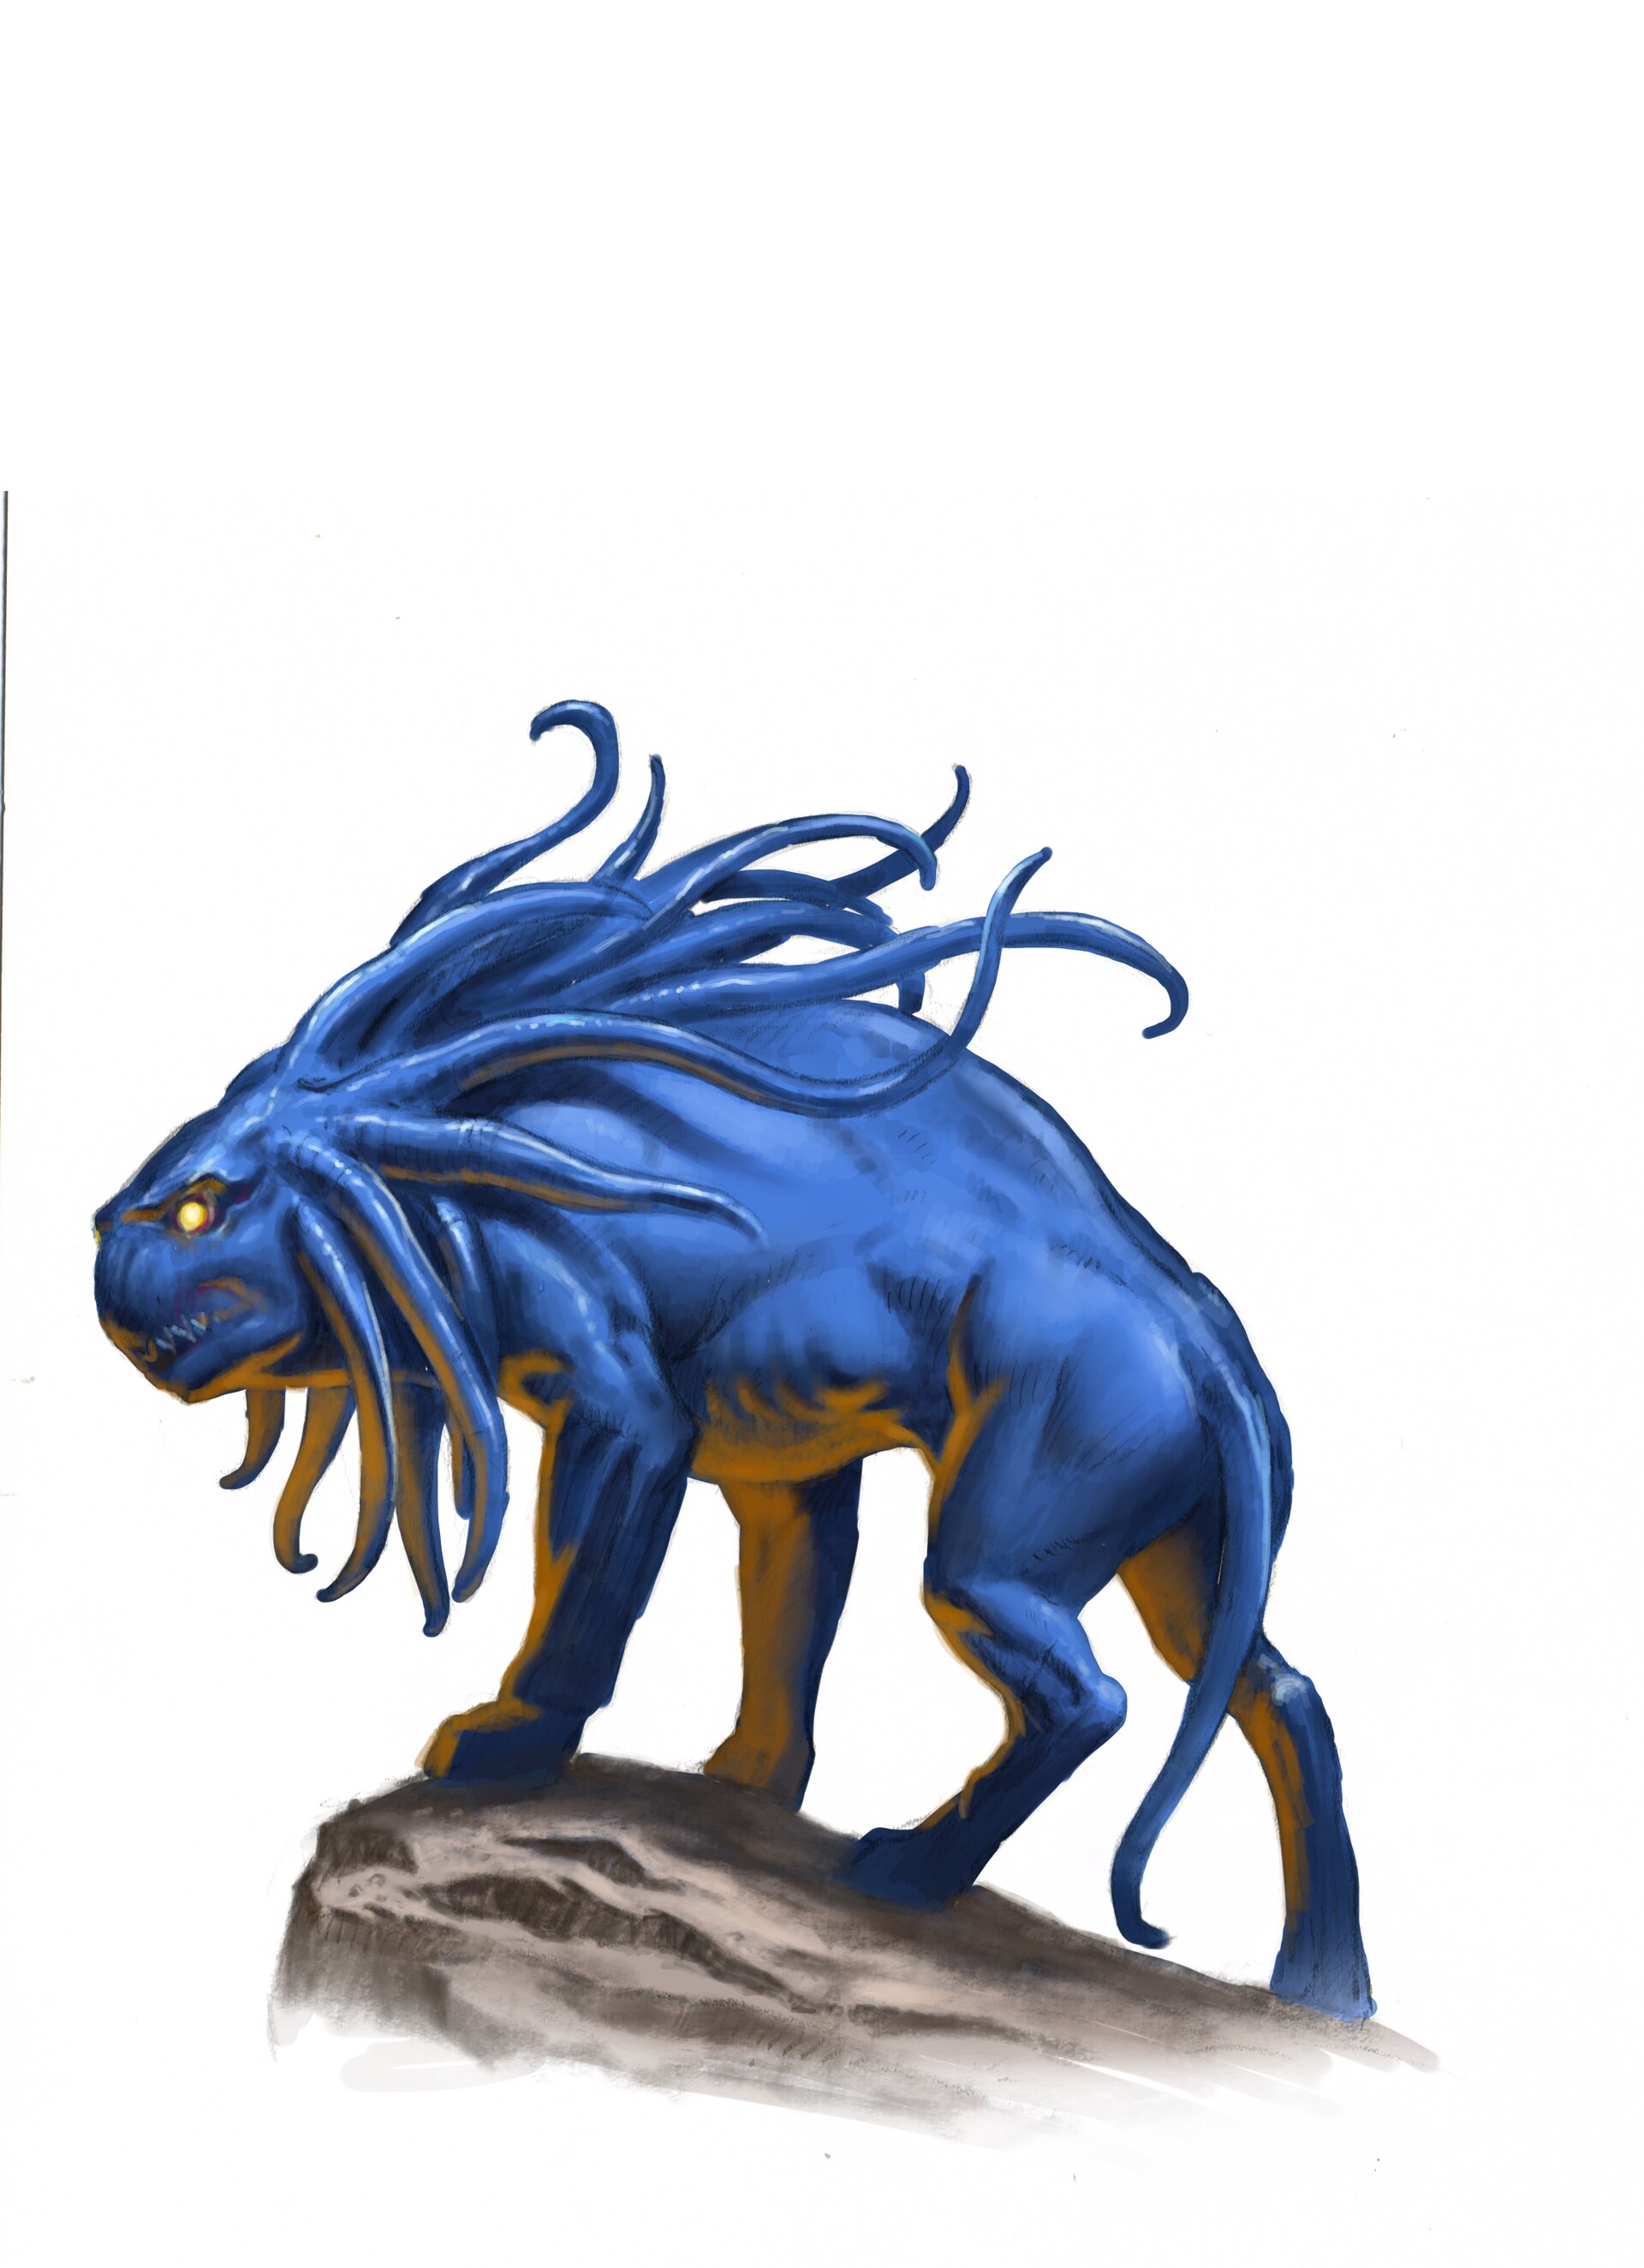 Creature for Pathfinder 2E Bestiary.